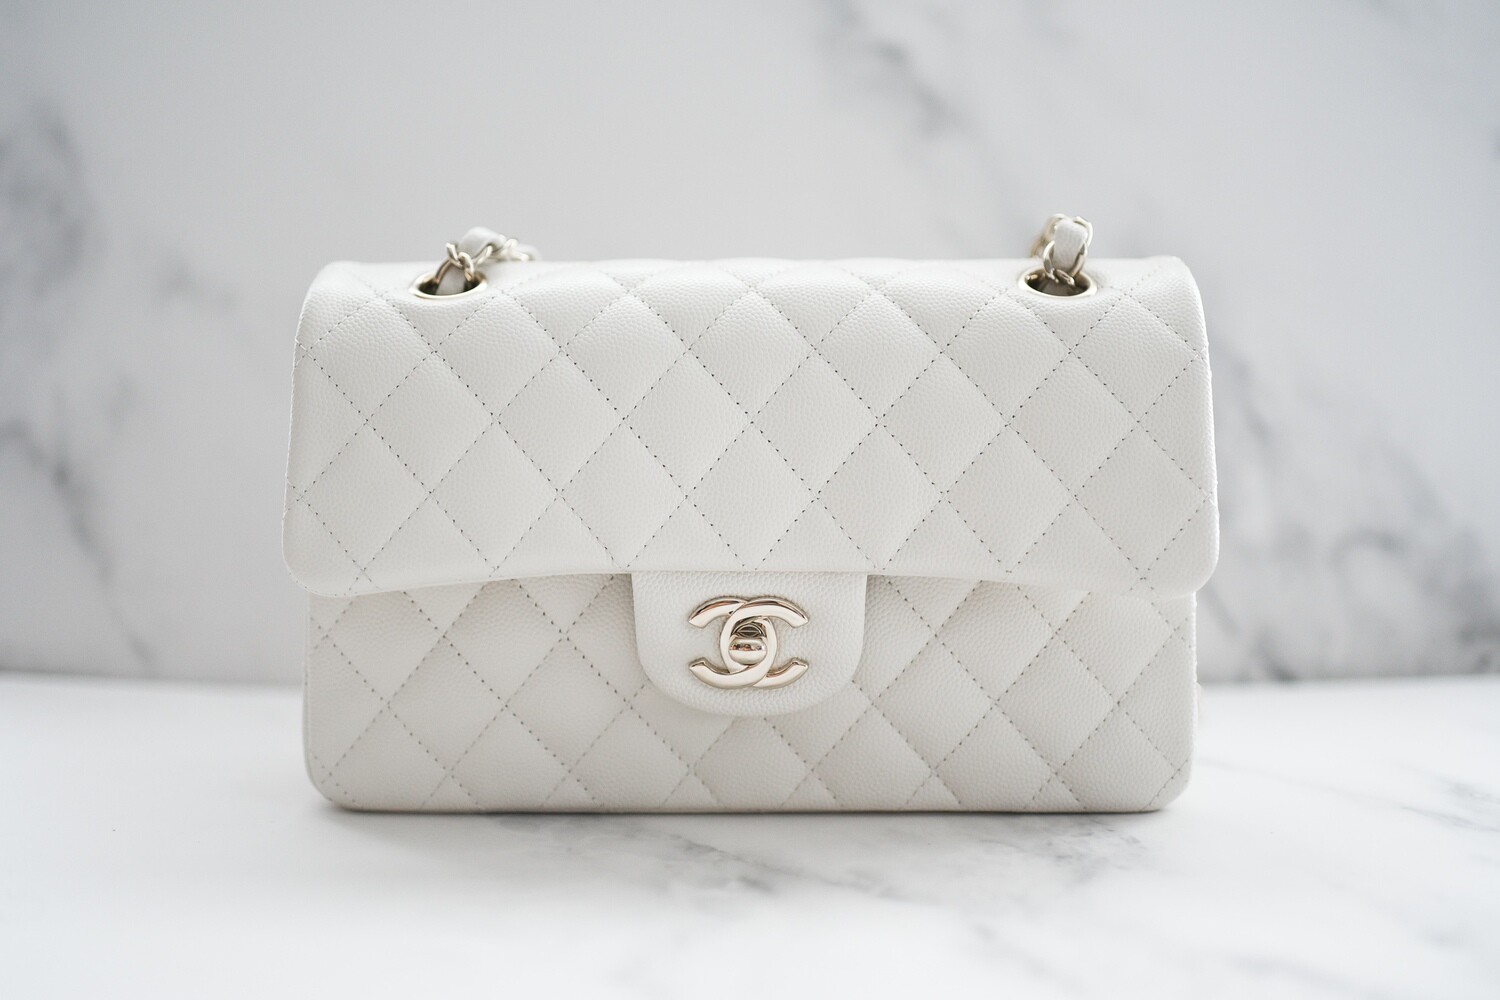 classic chanel double flap